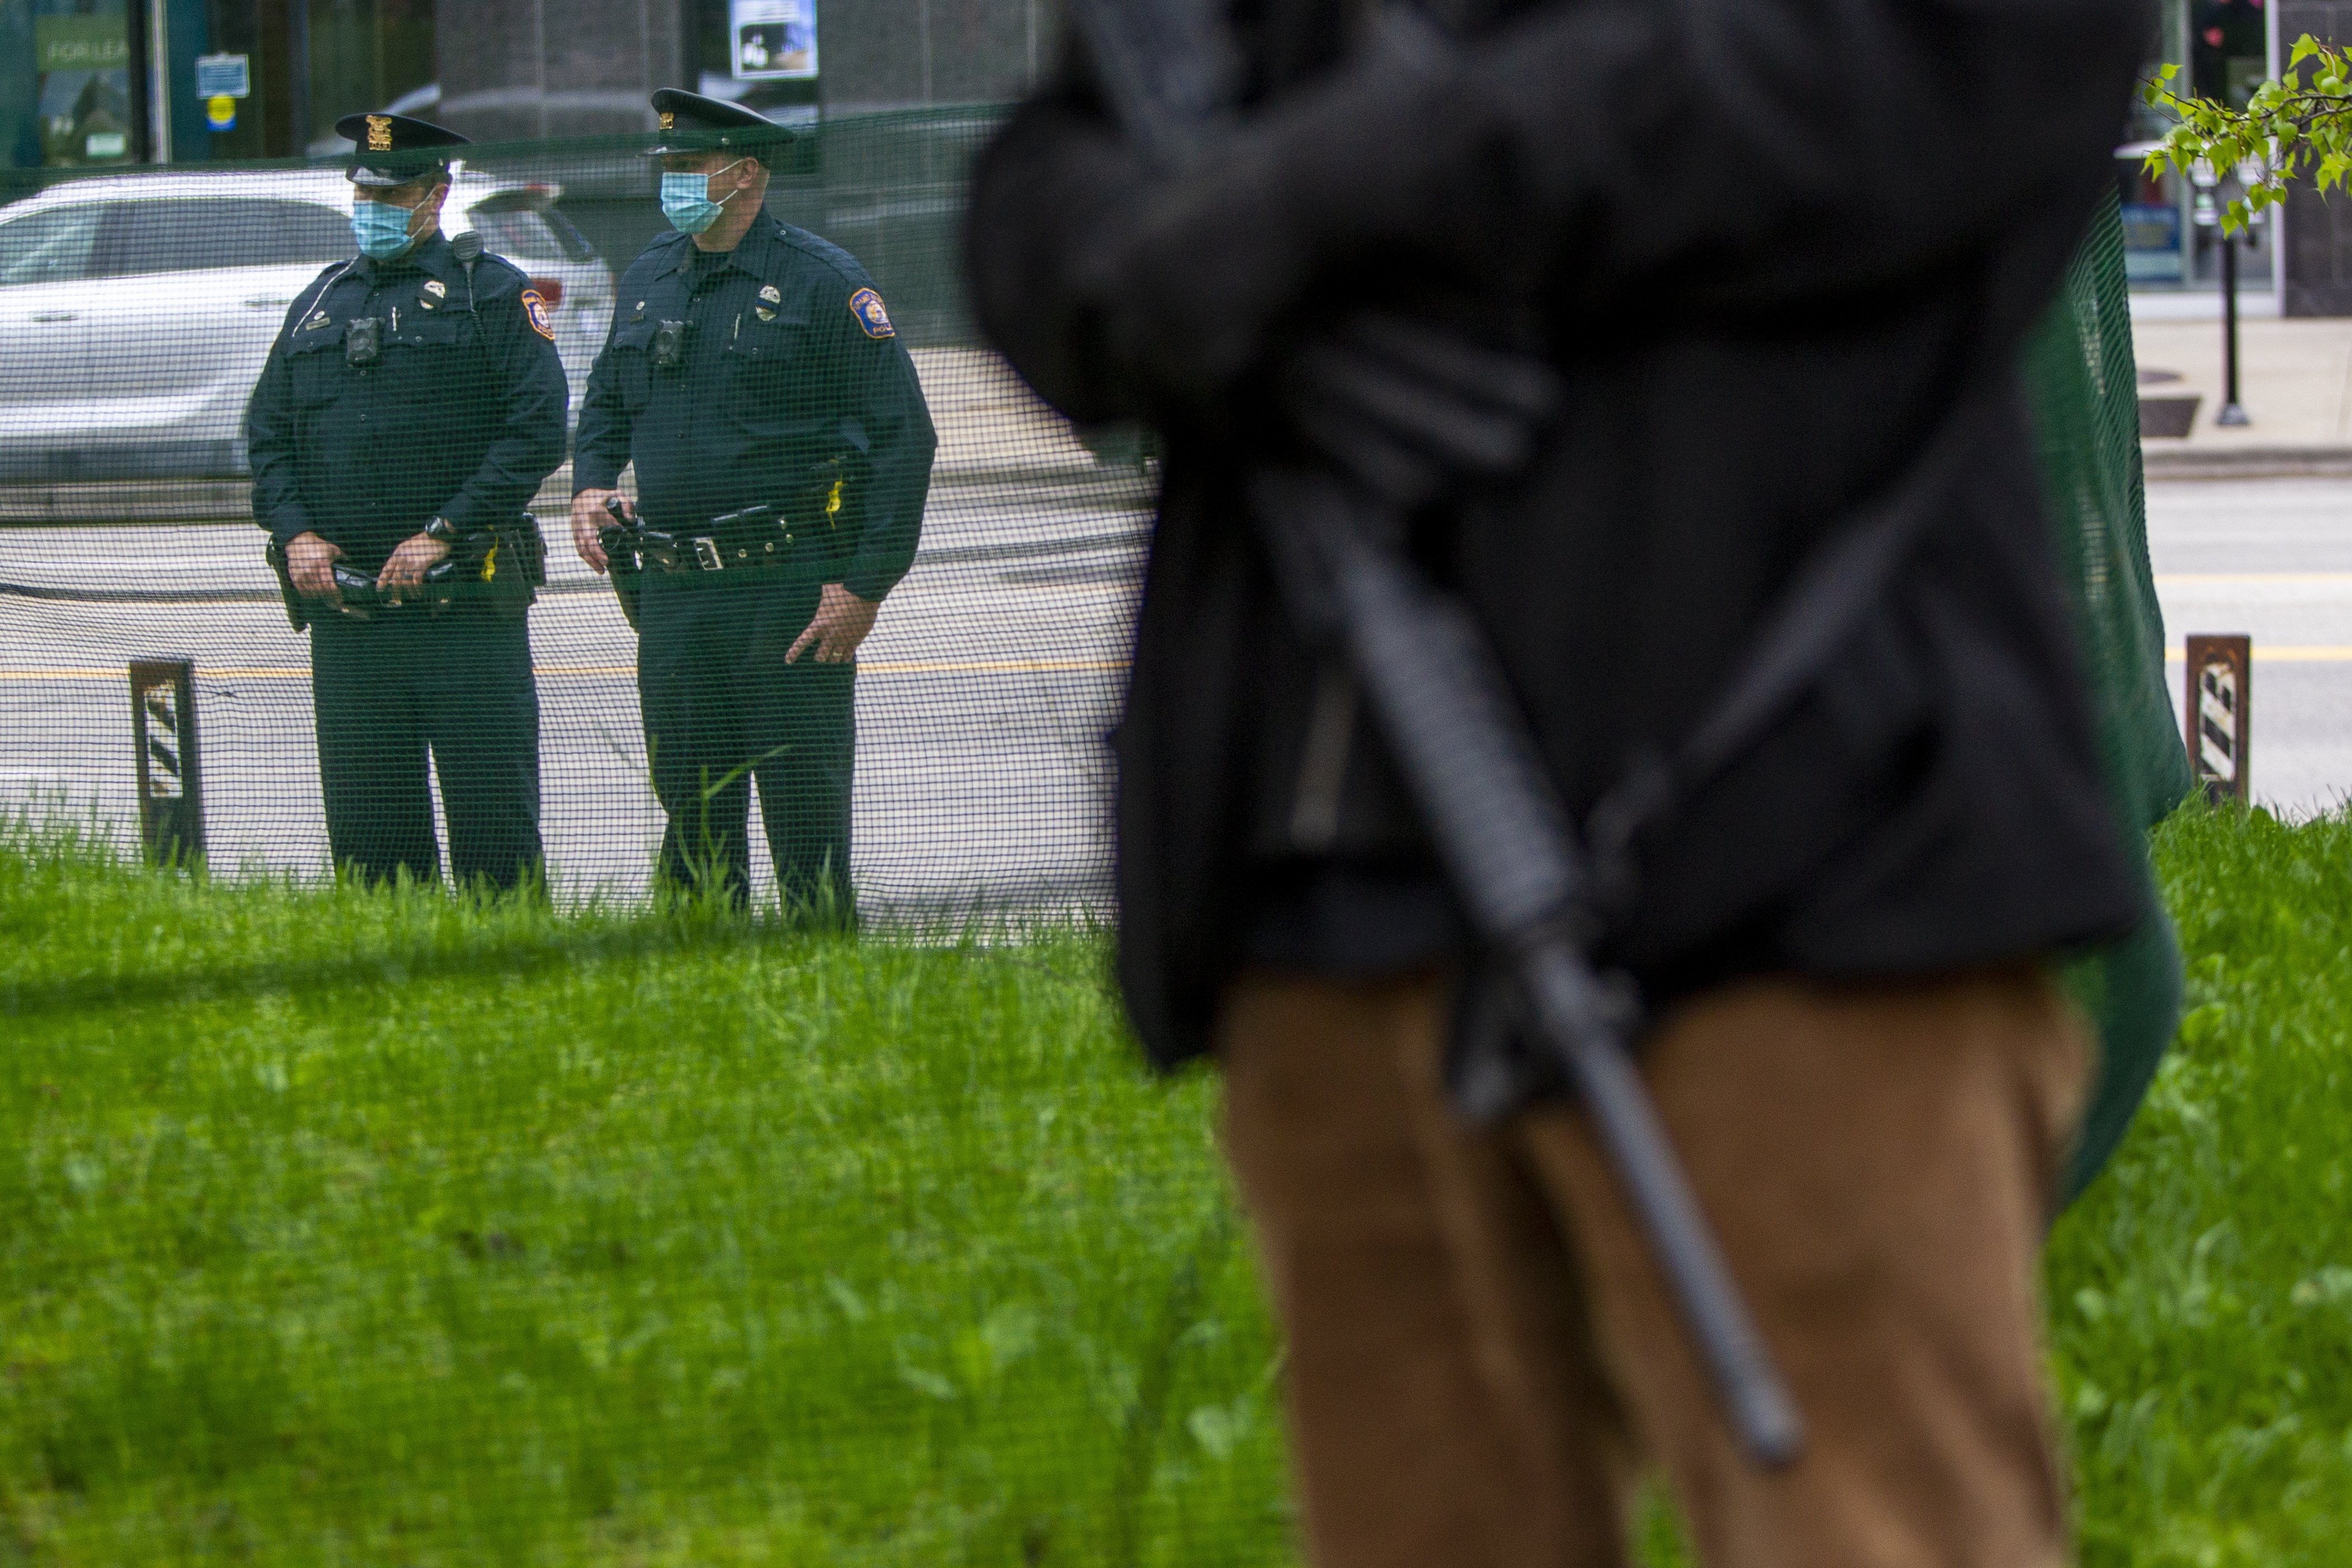 Law enforcement watches as a crowd gathers for the "American Patriot Rally-Sheriffs speak out" event at Rosa Parks Circle in downtown Grand Rapids on Monday, May 18, 2020. The crowd is protesting against Gov. Gretchen Whitmer's stay-at-home order. (Cory Morse | MLive.com)